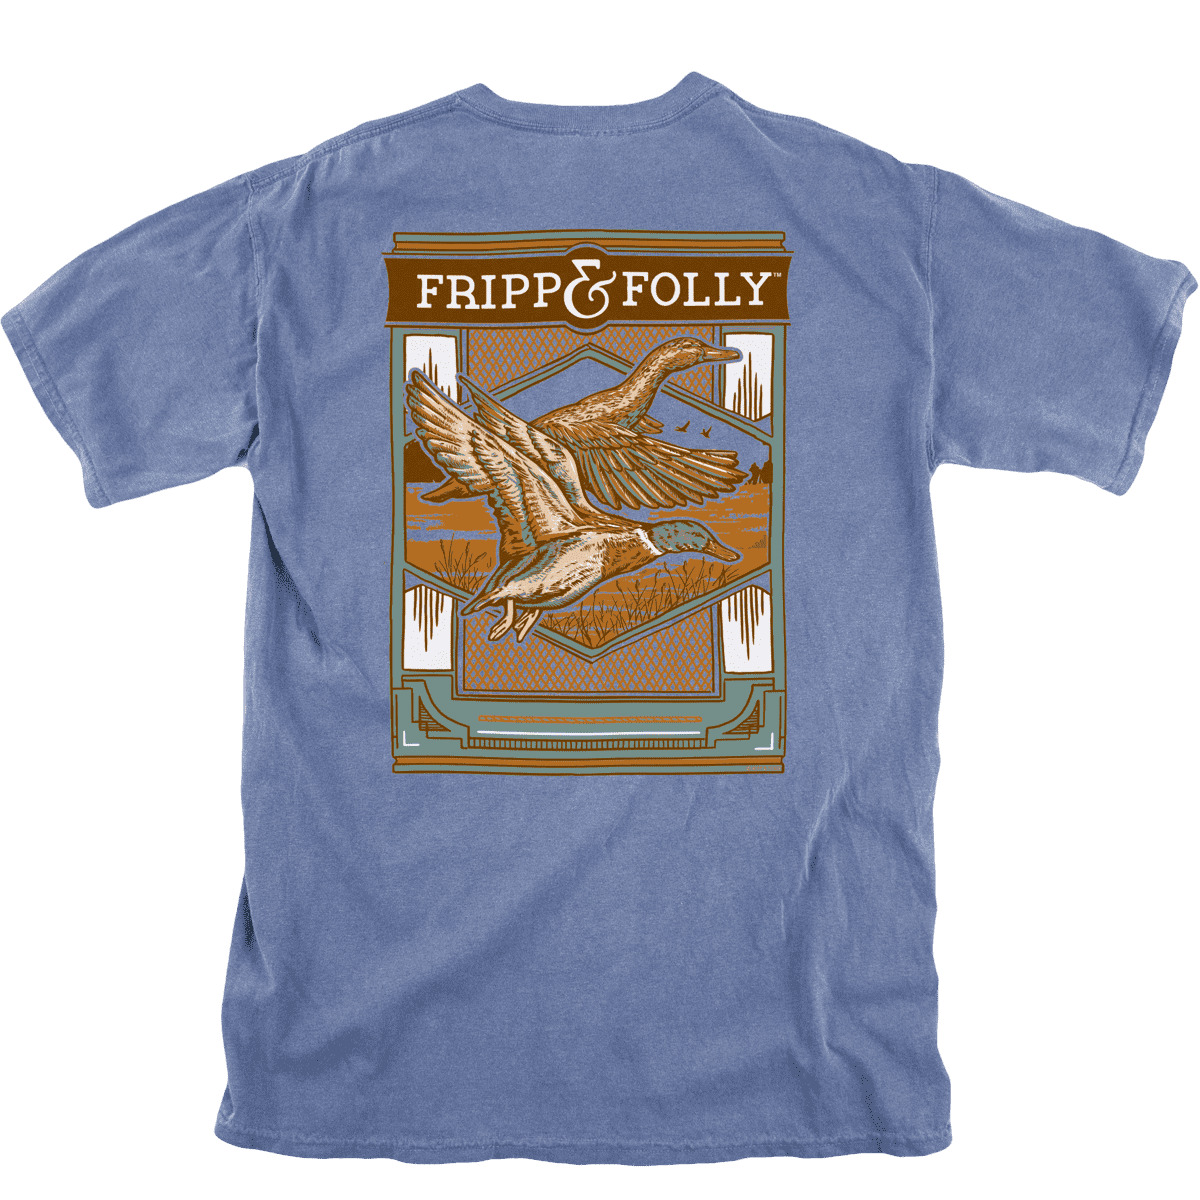 Two Ducks Tee in Blue Jean by Fripp & Folly - Country Club Prep